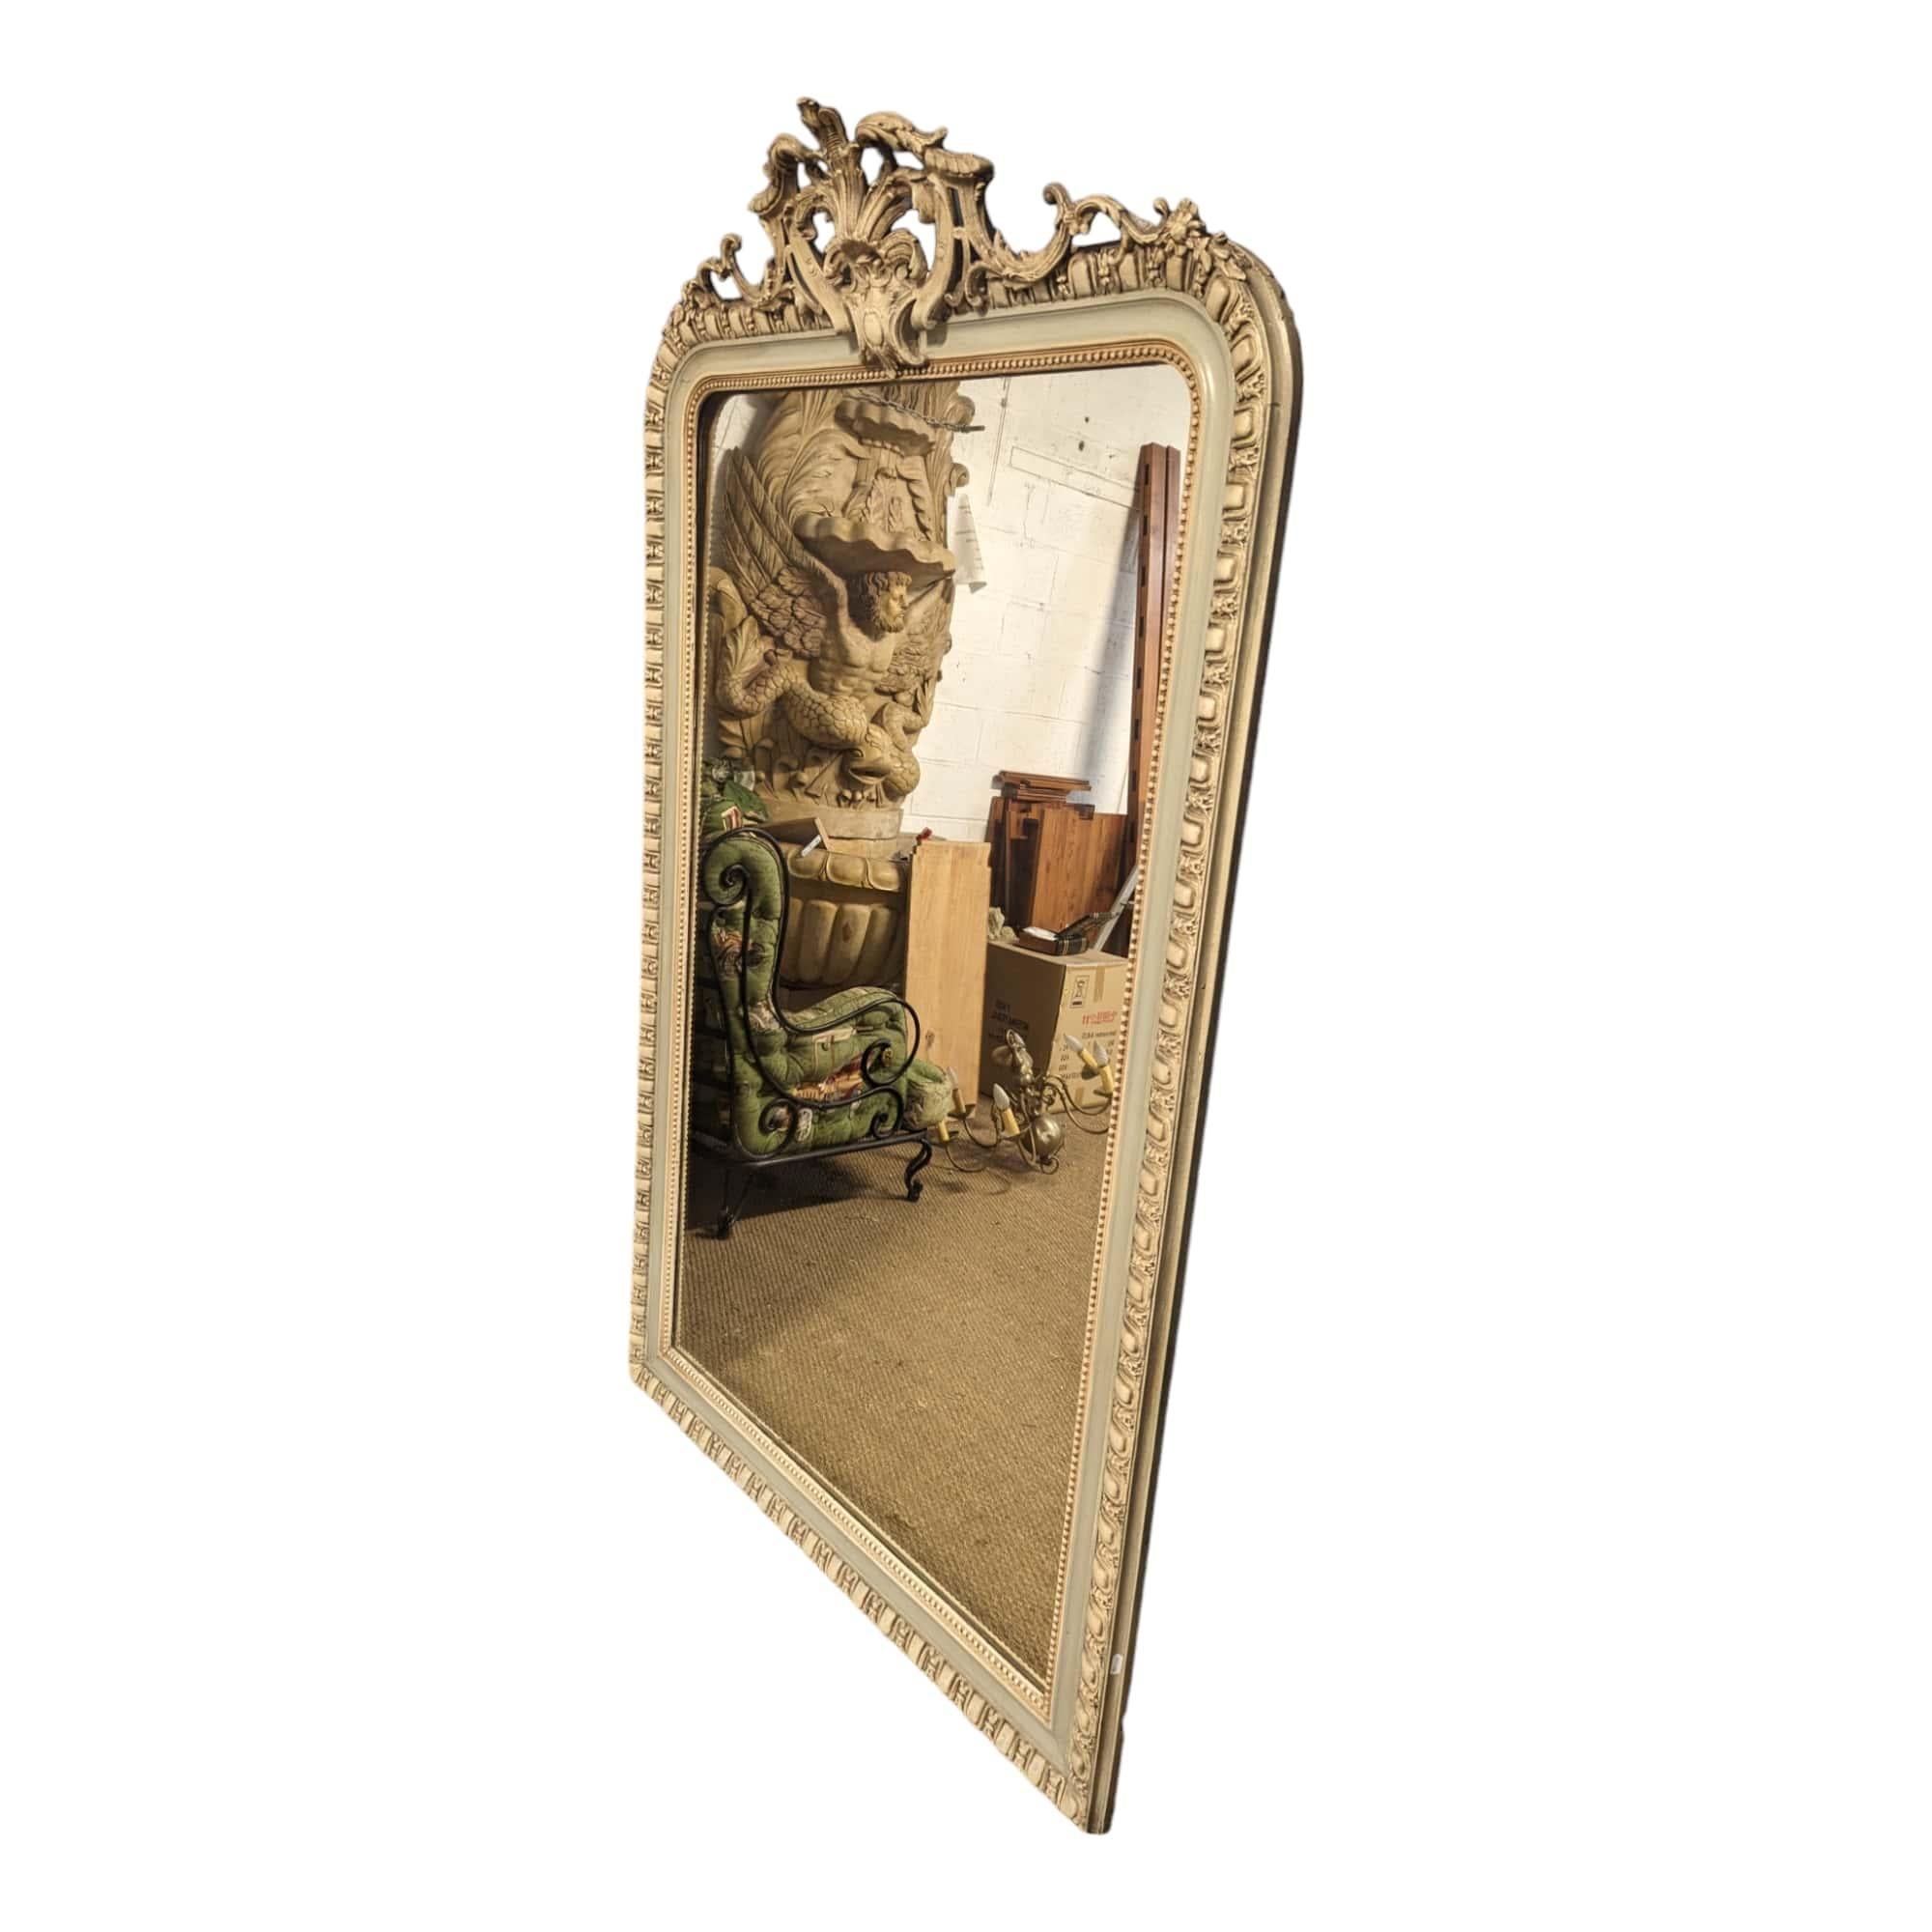 Coming from France. Add a touch of antique charm to your space with this stunning late 19th century double patina mirror, a piece that exudes the elegance and character of a bygone era.

Made with meticulous craftsmanship and attention to detail,